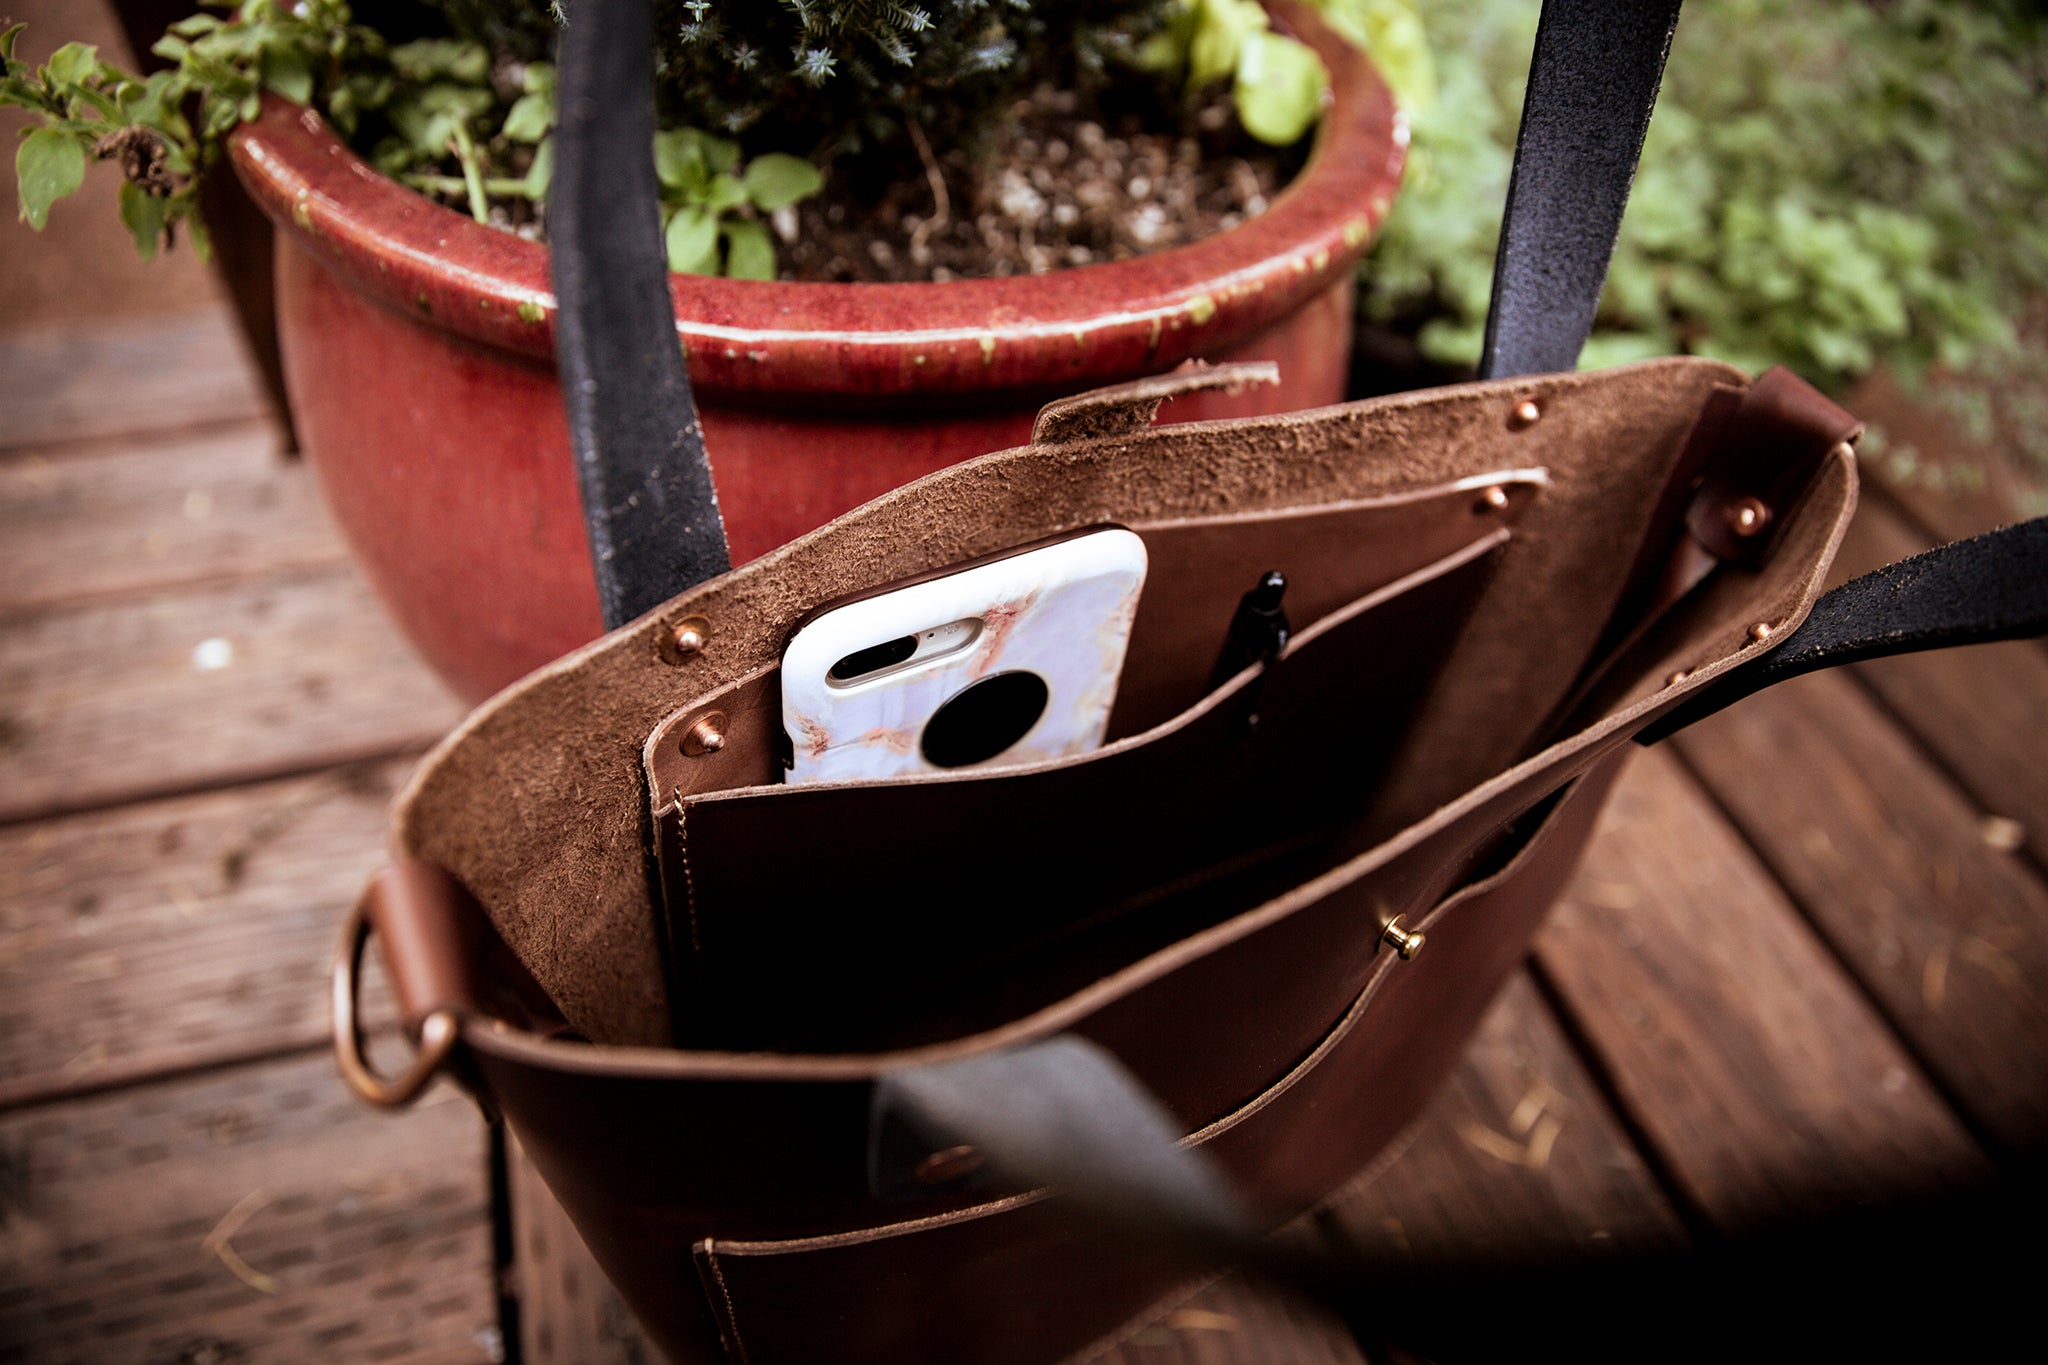 Tote Bag - Chestnut and Natural Leather